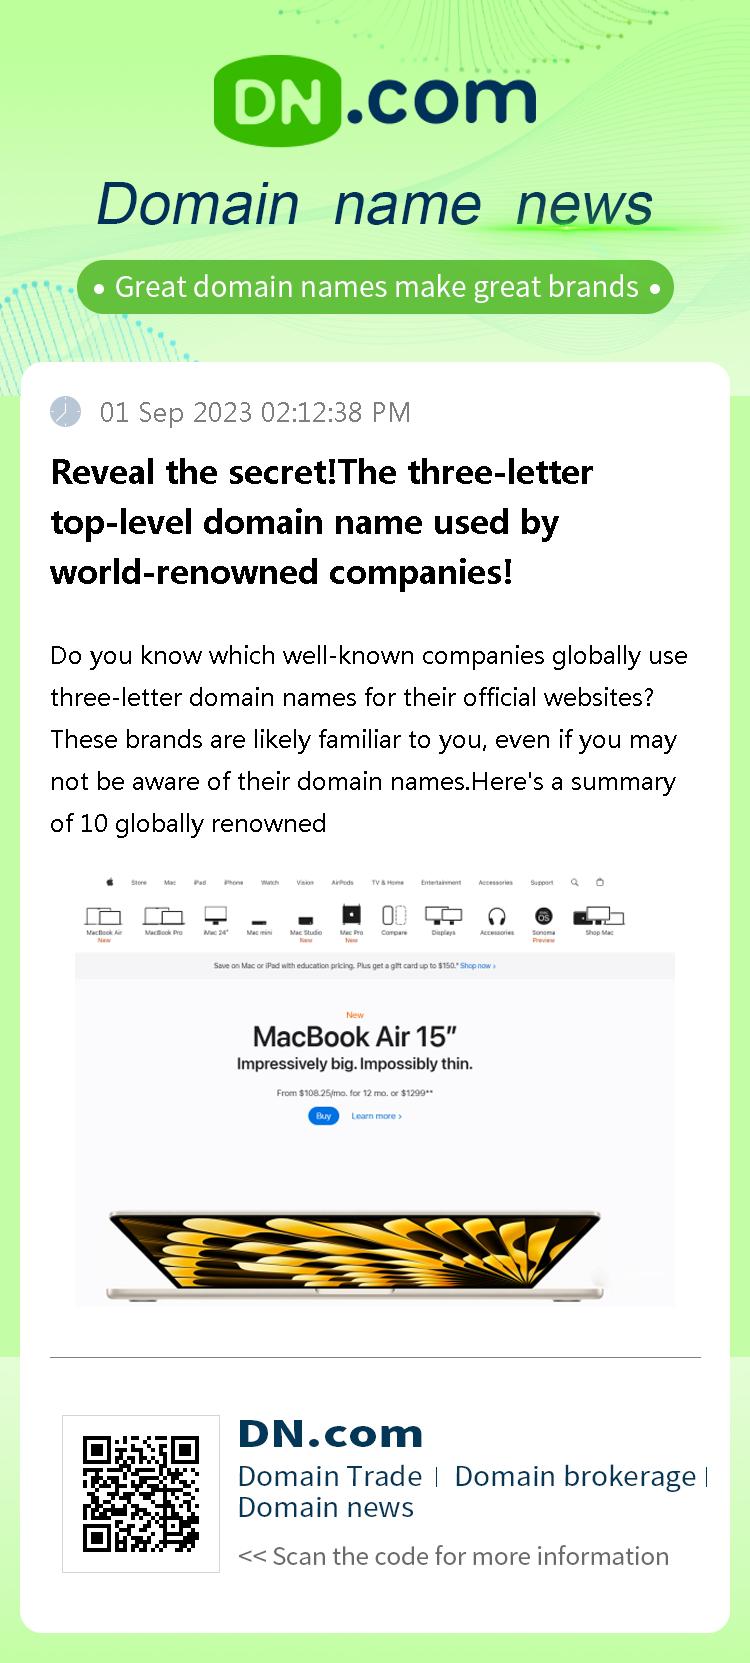 Reveal the secret!The three-letter top-level domain name used by world-renowned companies!